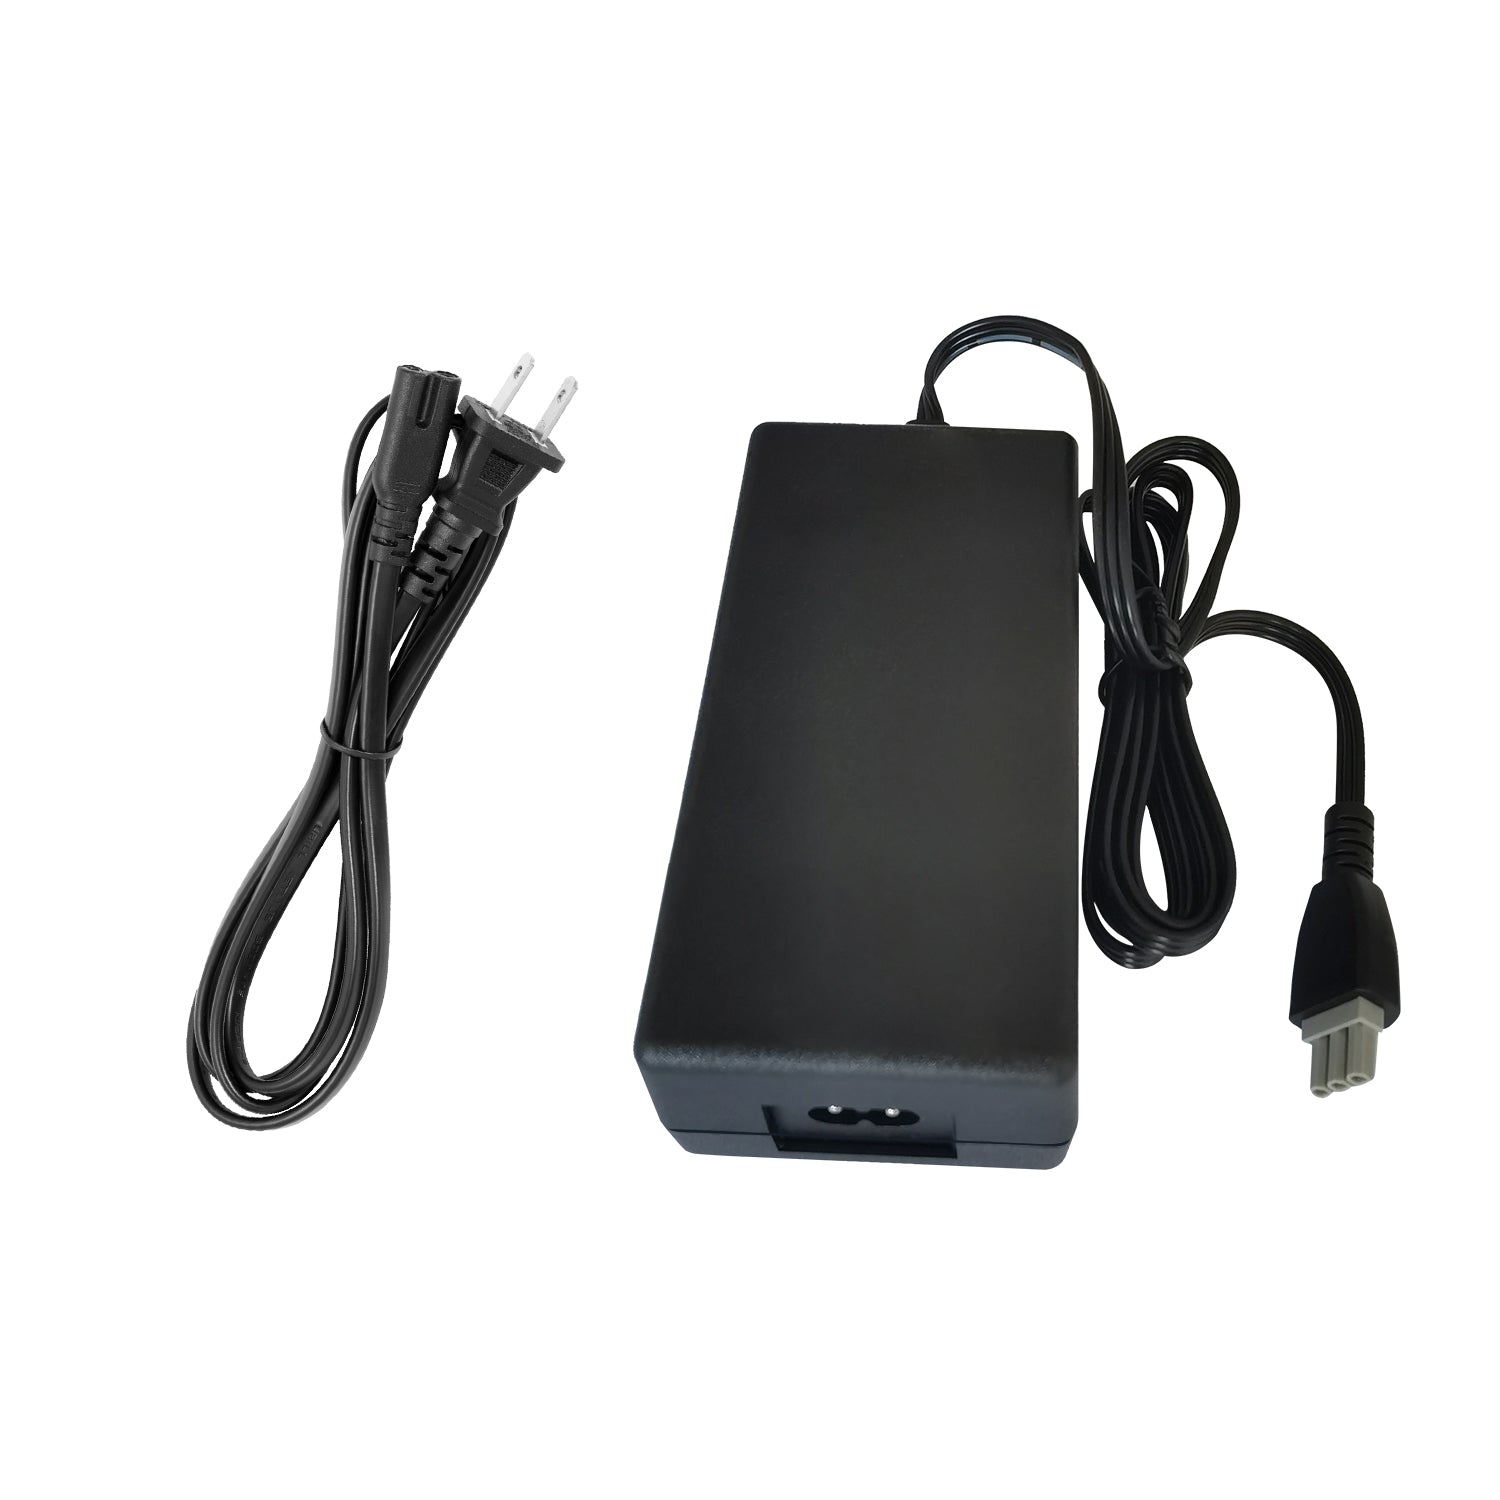 Power Adapter for hp psc 2350 Printer.